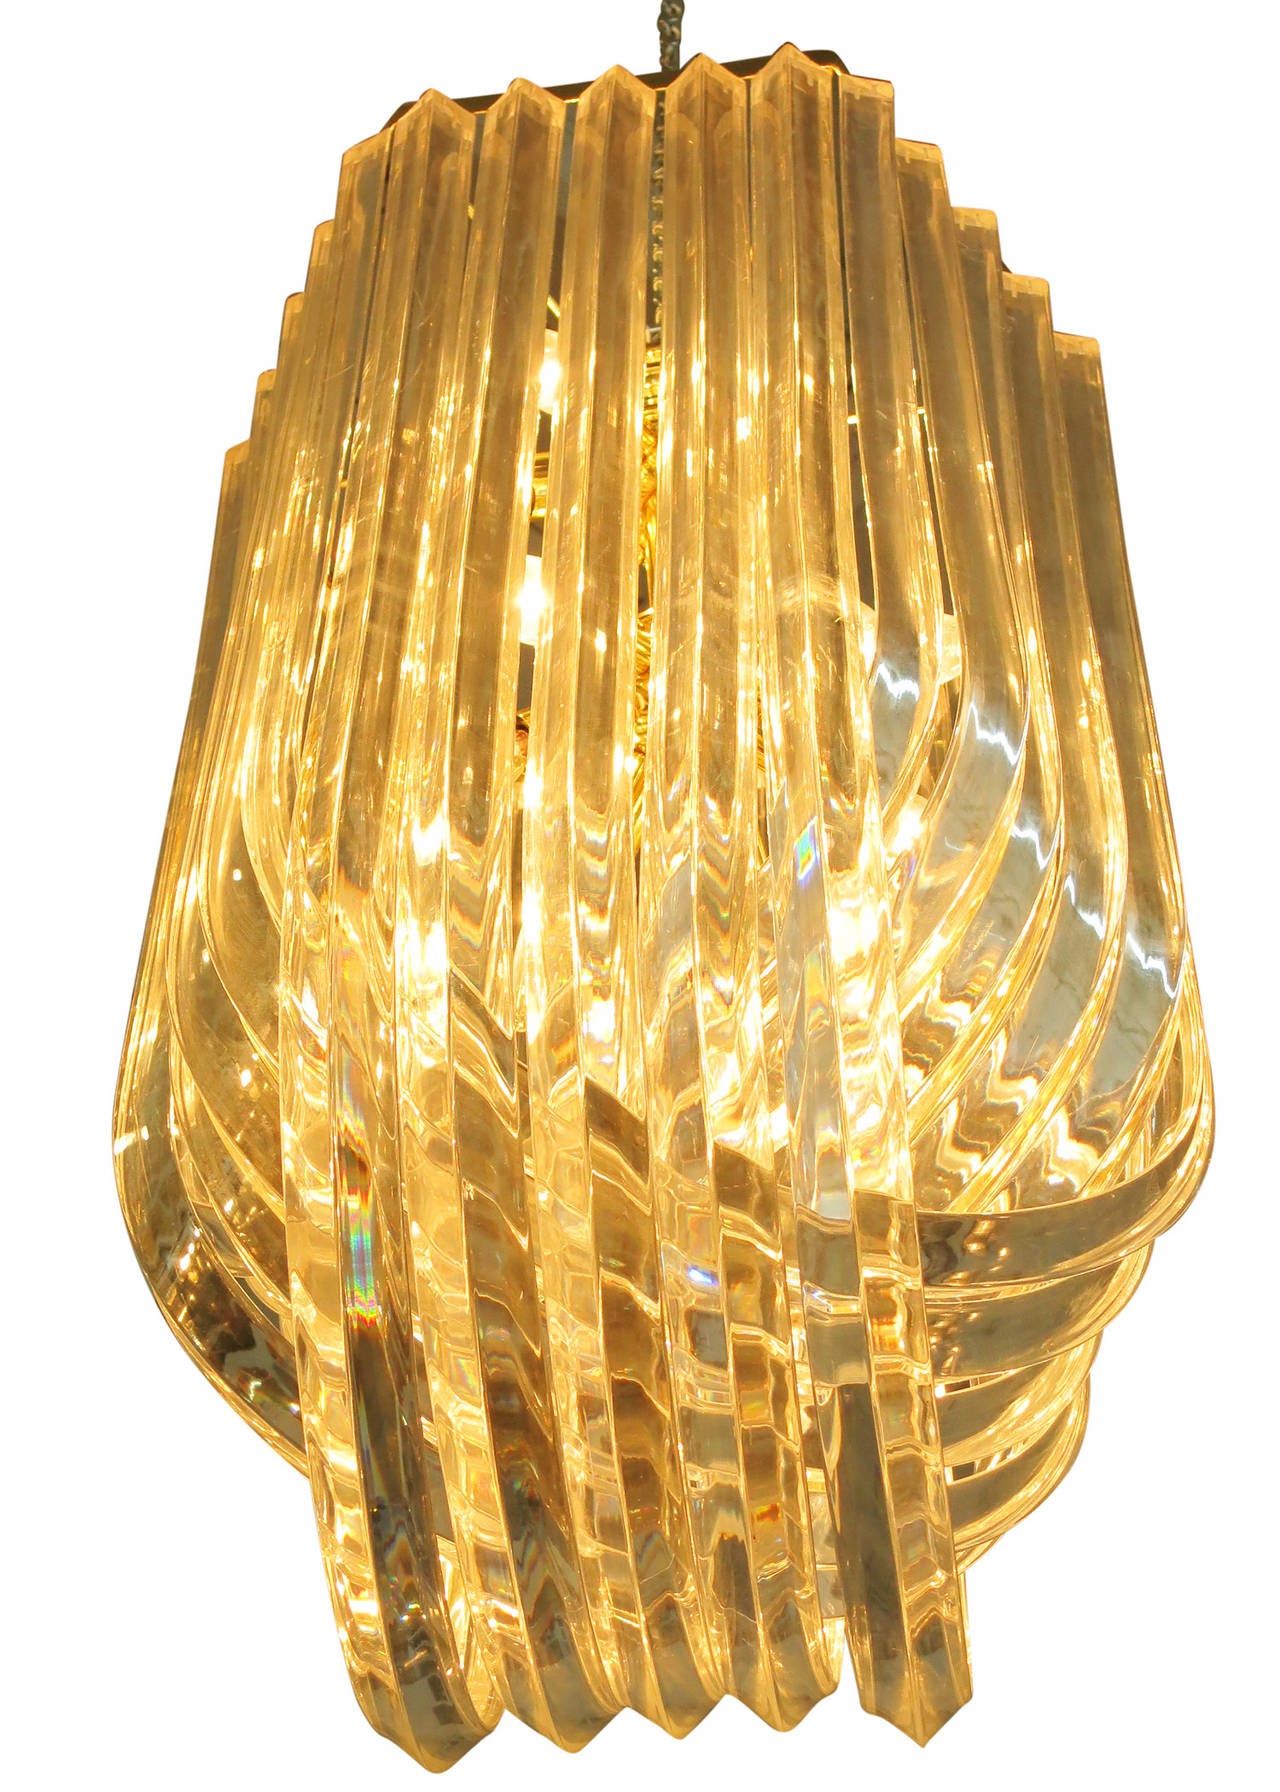 Made circa 1970, this Hollywood Regency inspired sculptural Lucite chandelier is comprised of three rows of twisted 2 inch thick Lucite ribbons of various sizing. These ribbons crisscross through each other while fixed to a brass frame.

 